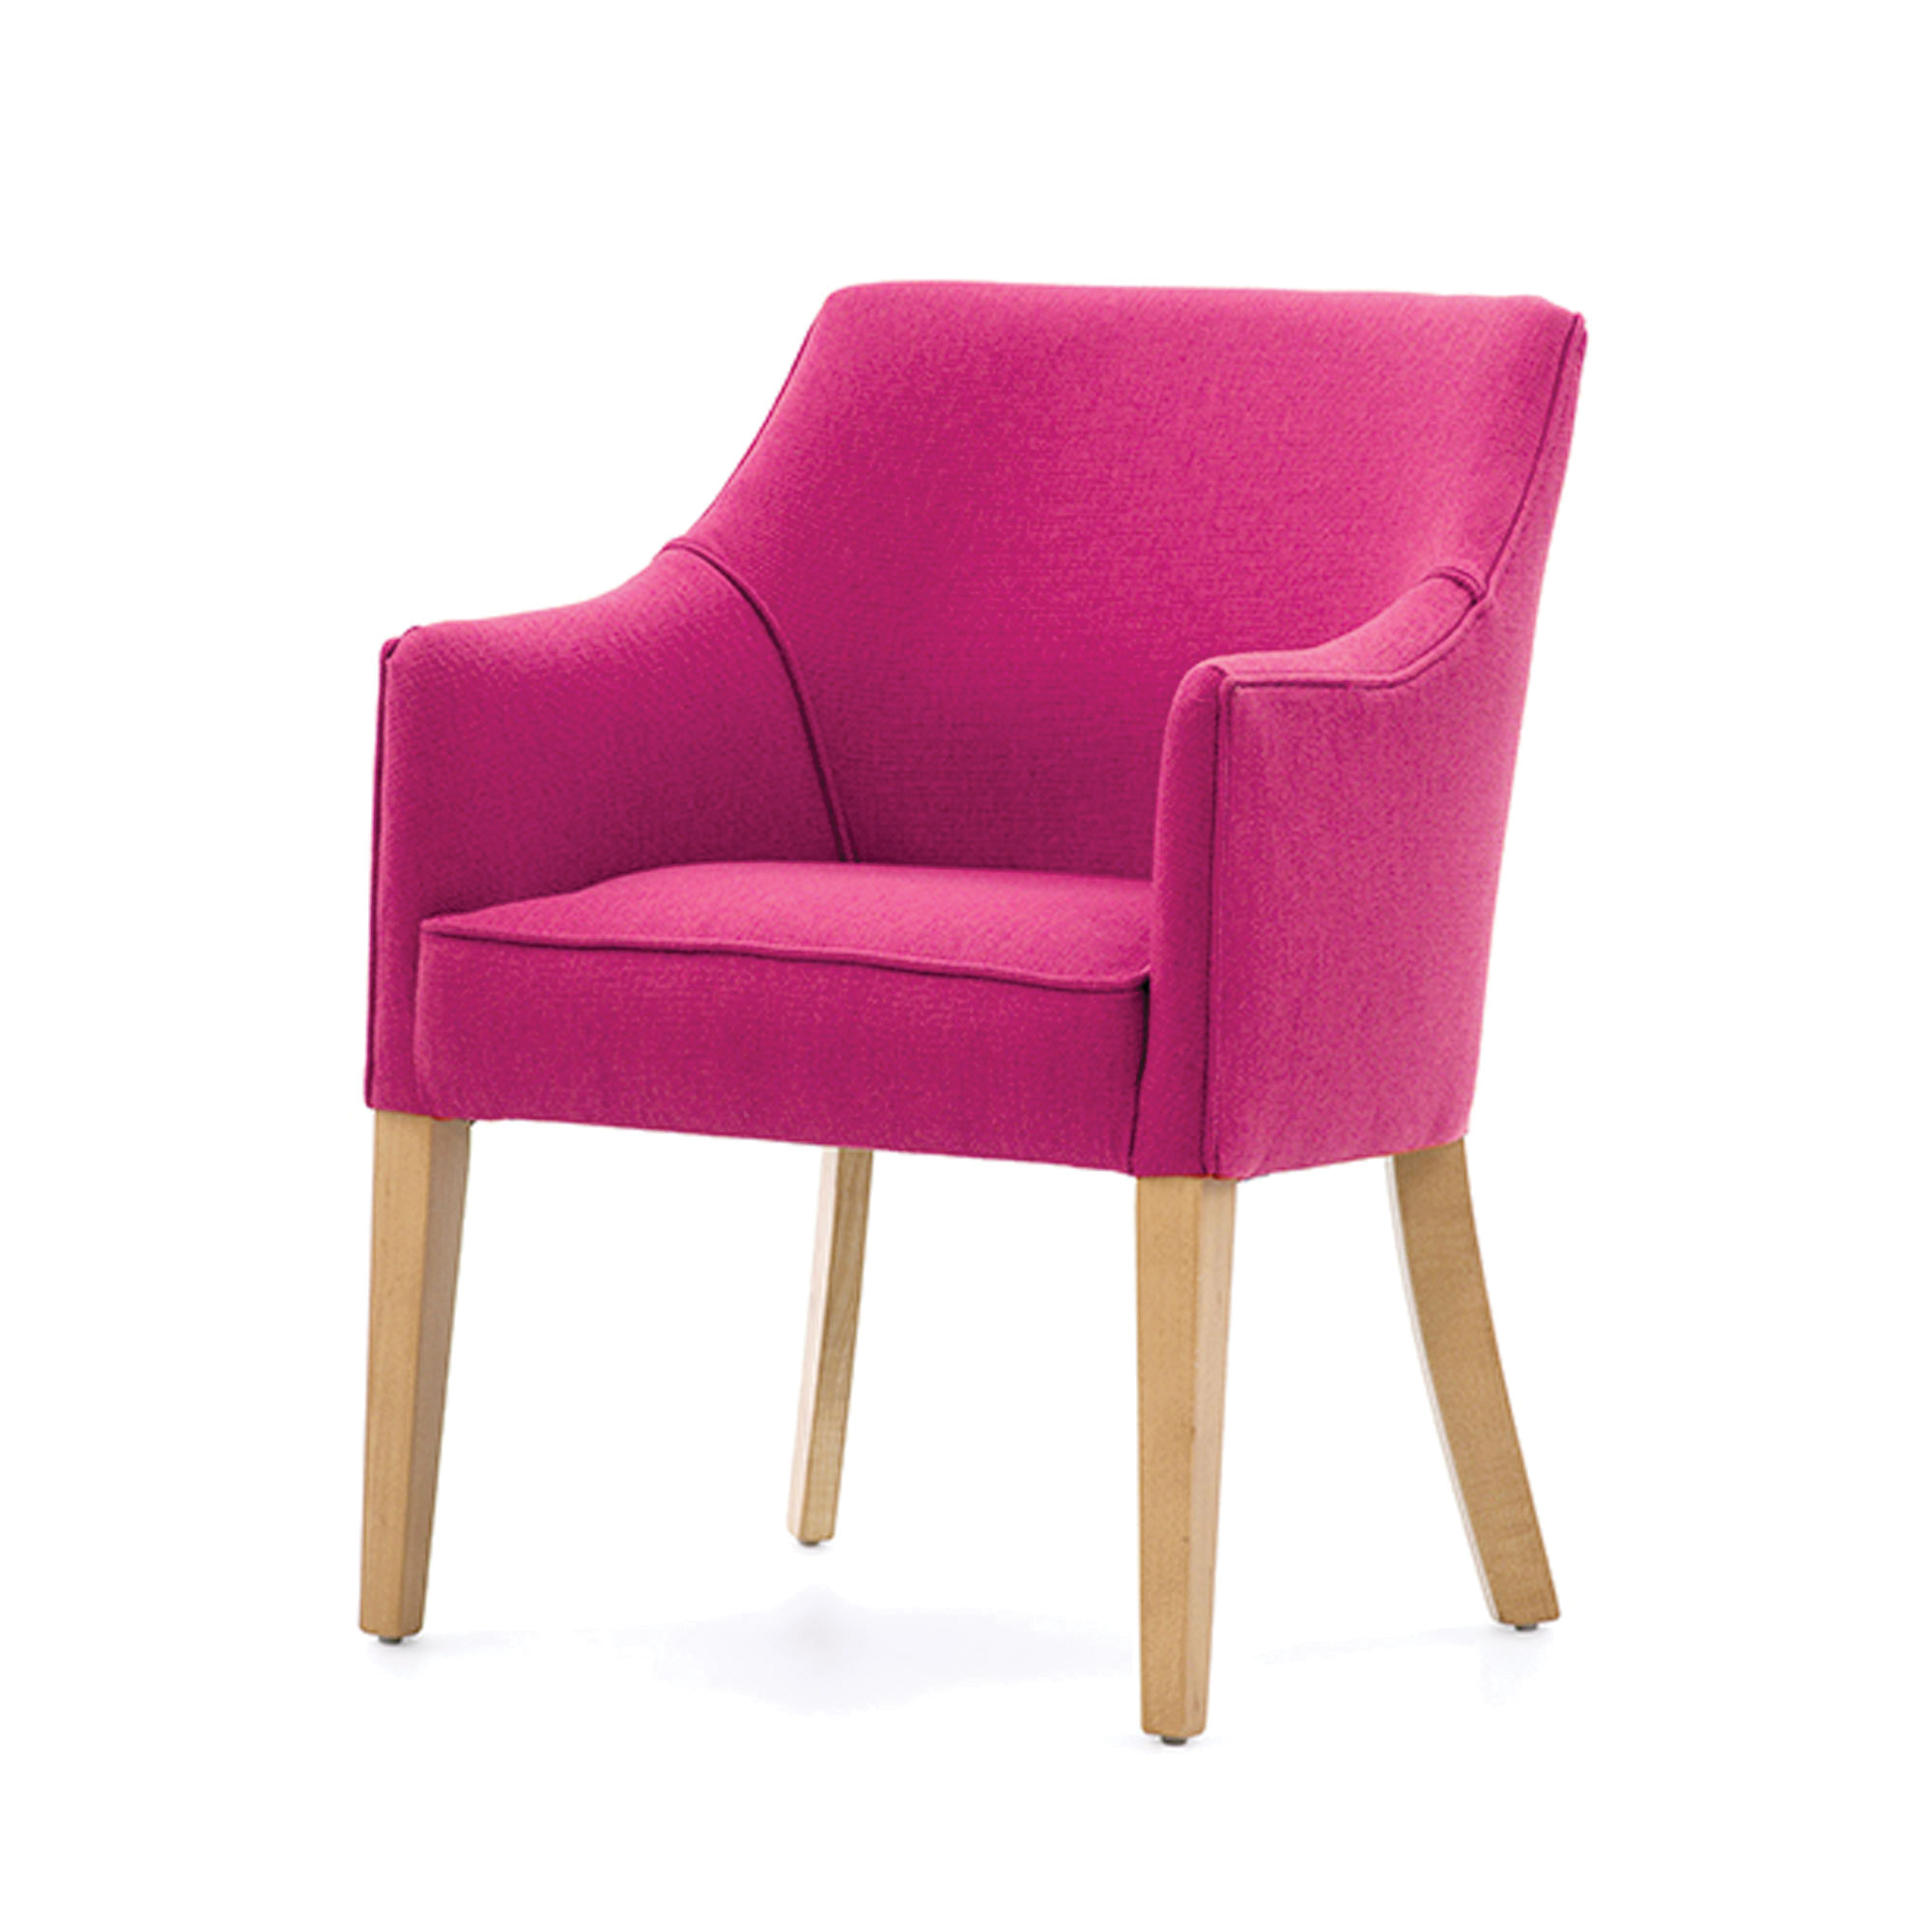 Dover Chair With Arms C Range